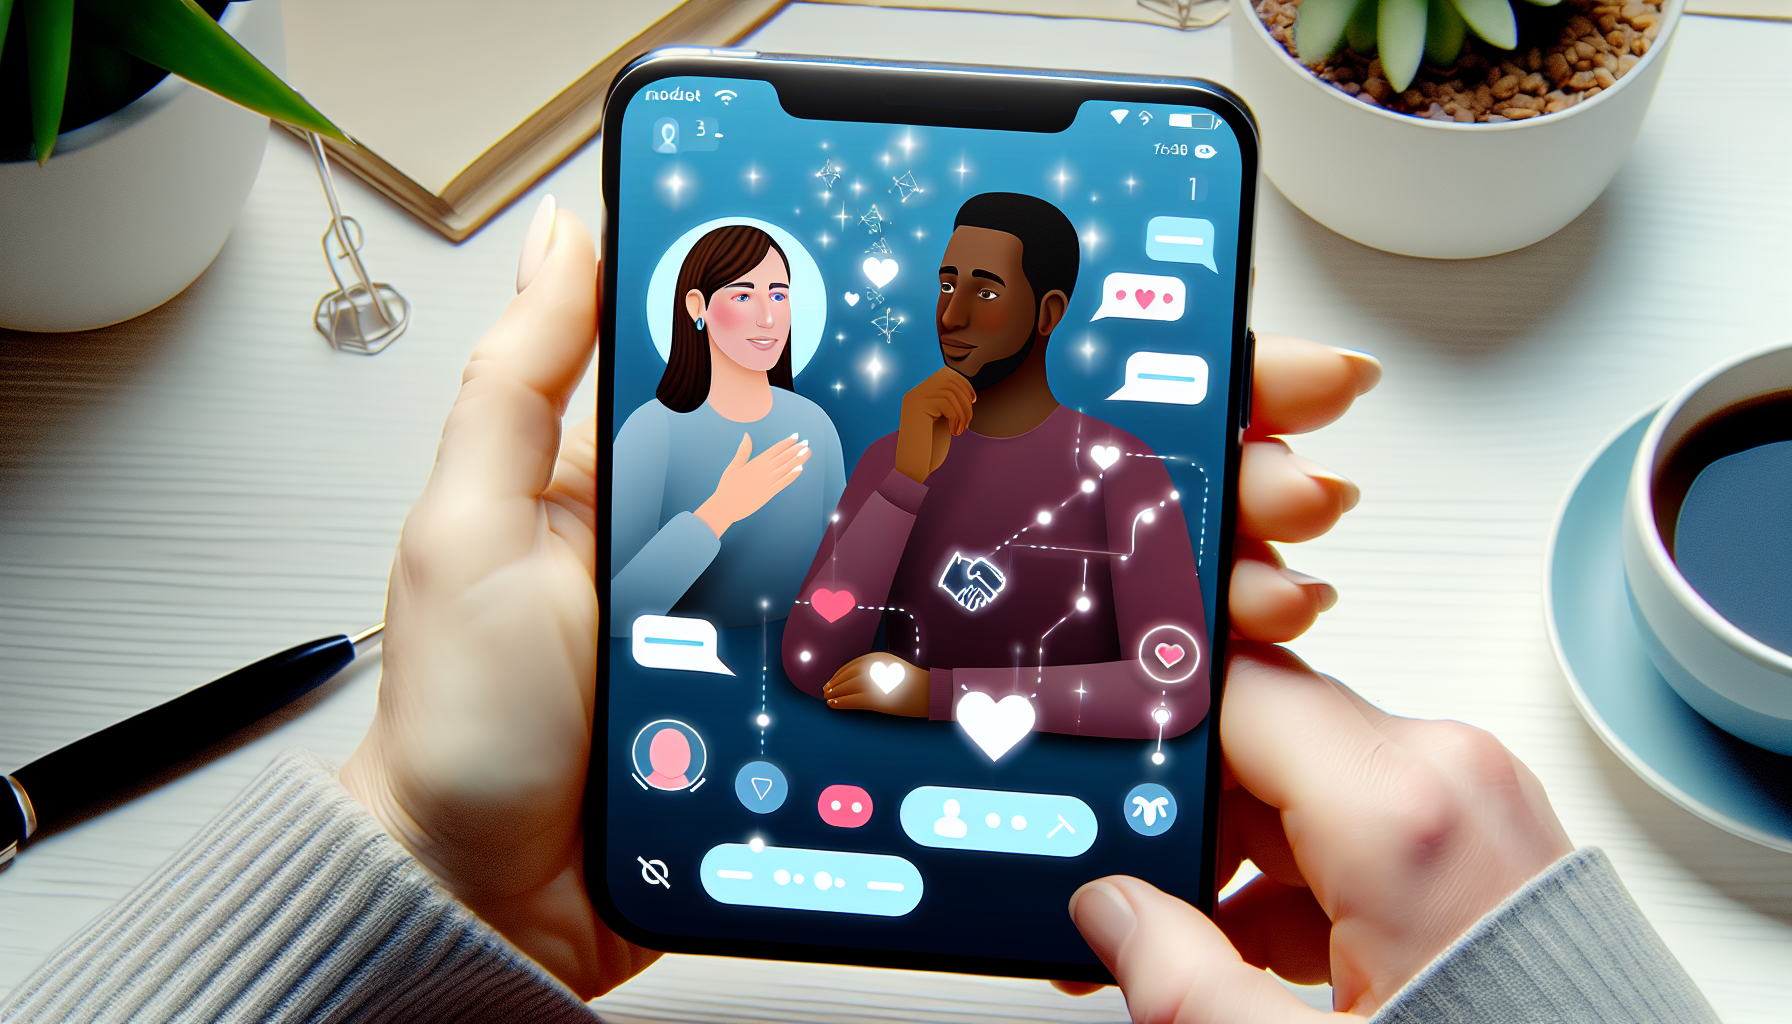 Illustration of a virtual therapy session facilitated by a dating app